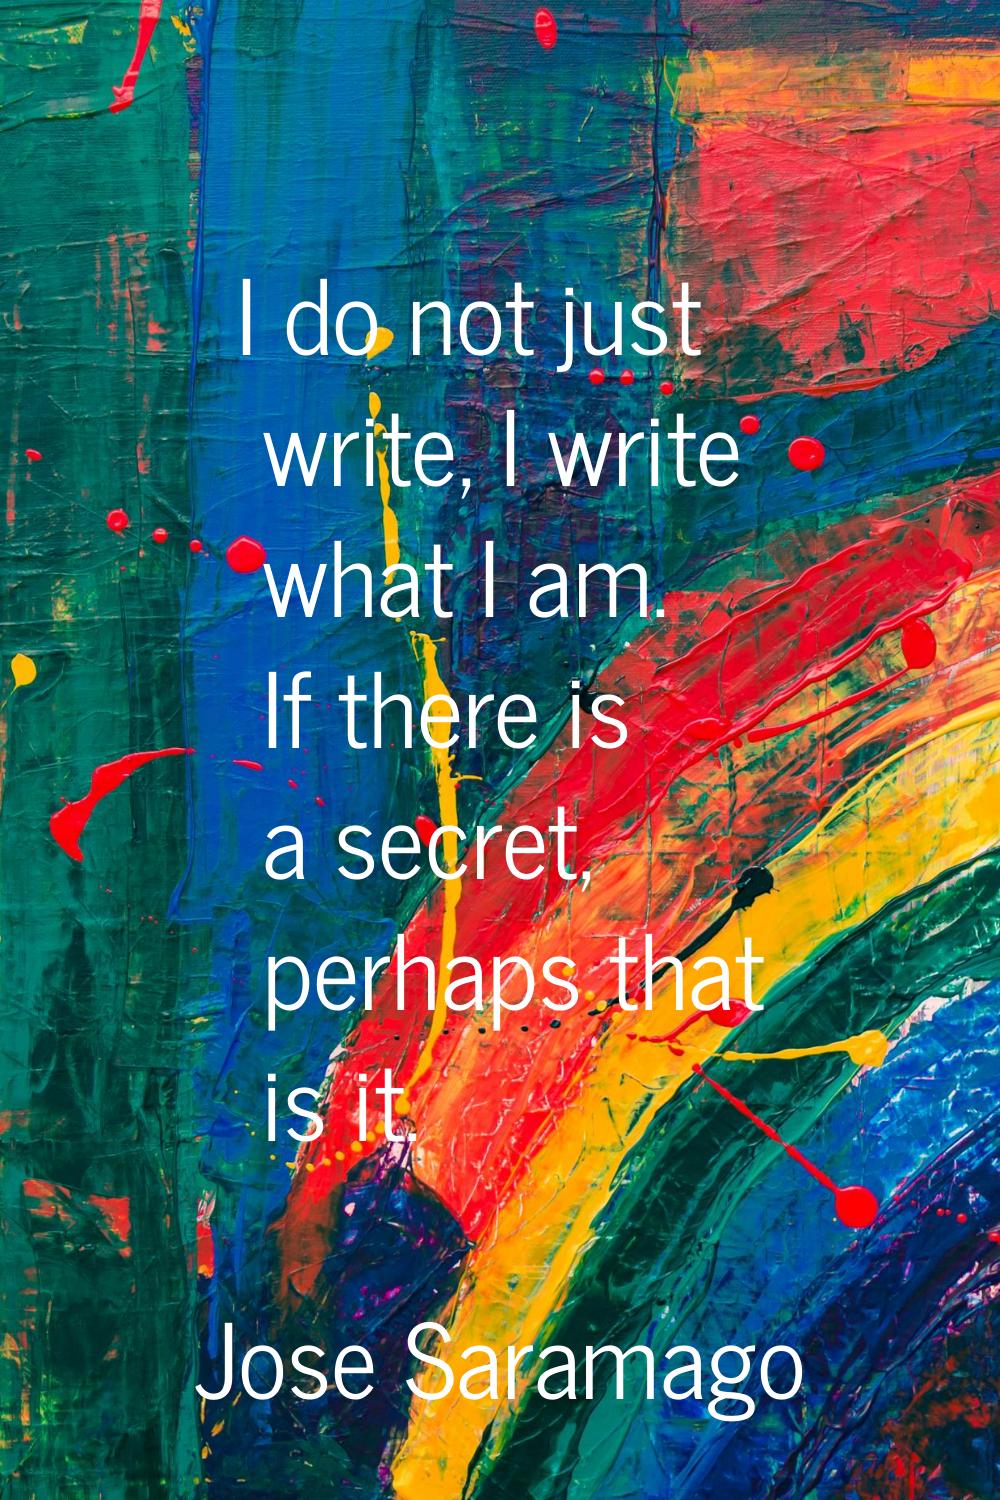 I do not just write, I write what I am. If there is a secret, perhaps that is it.